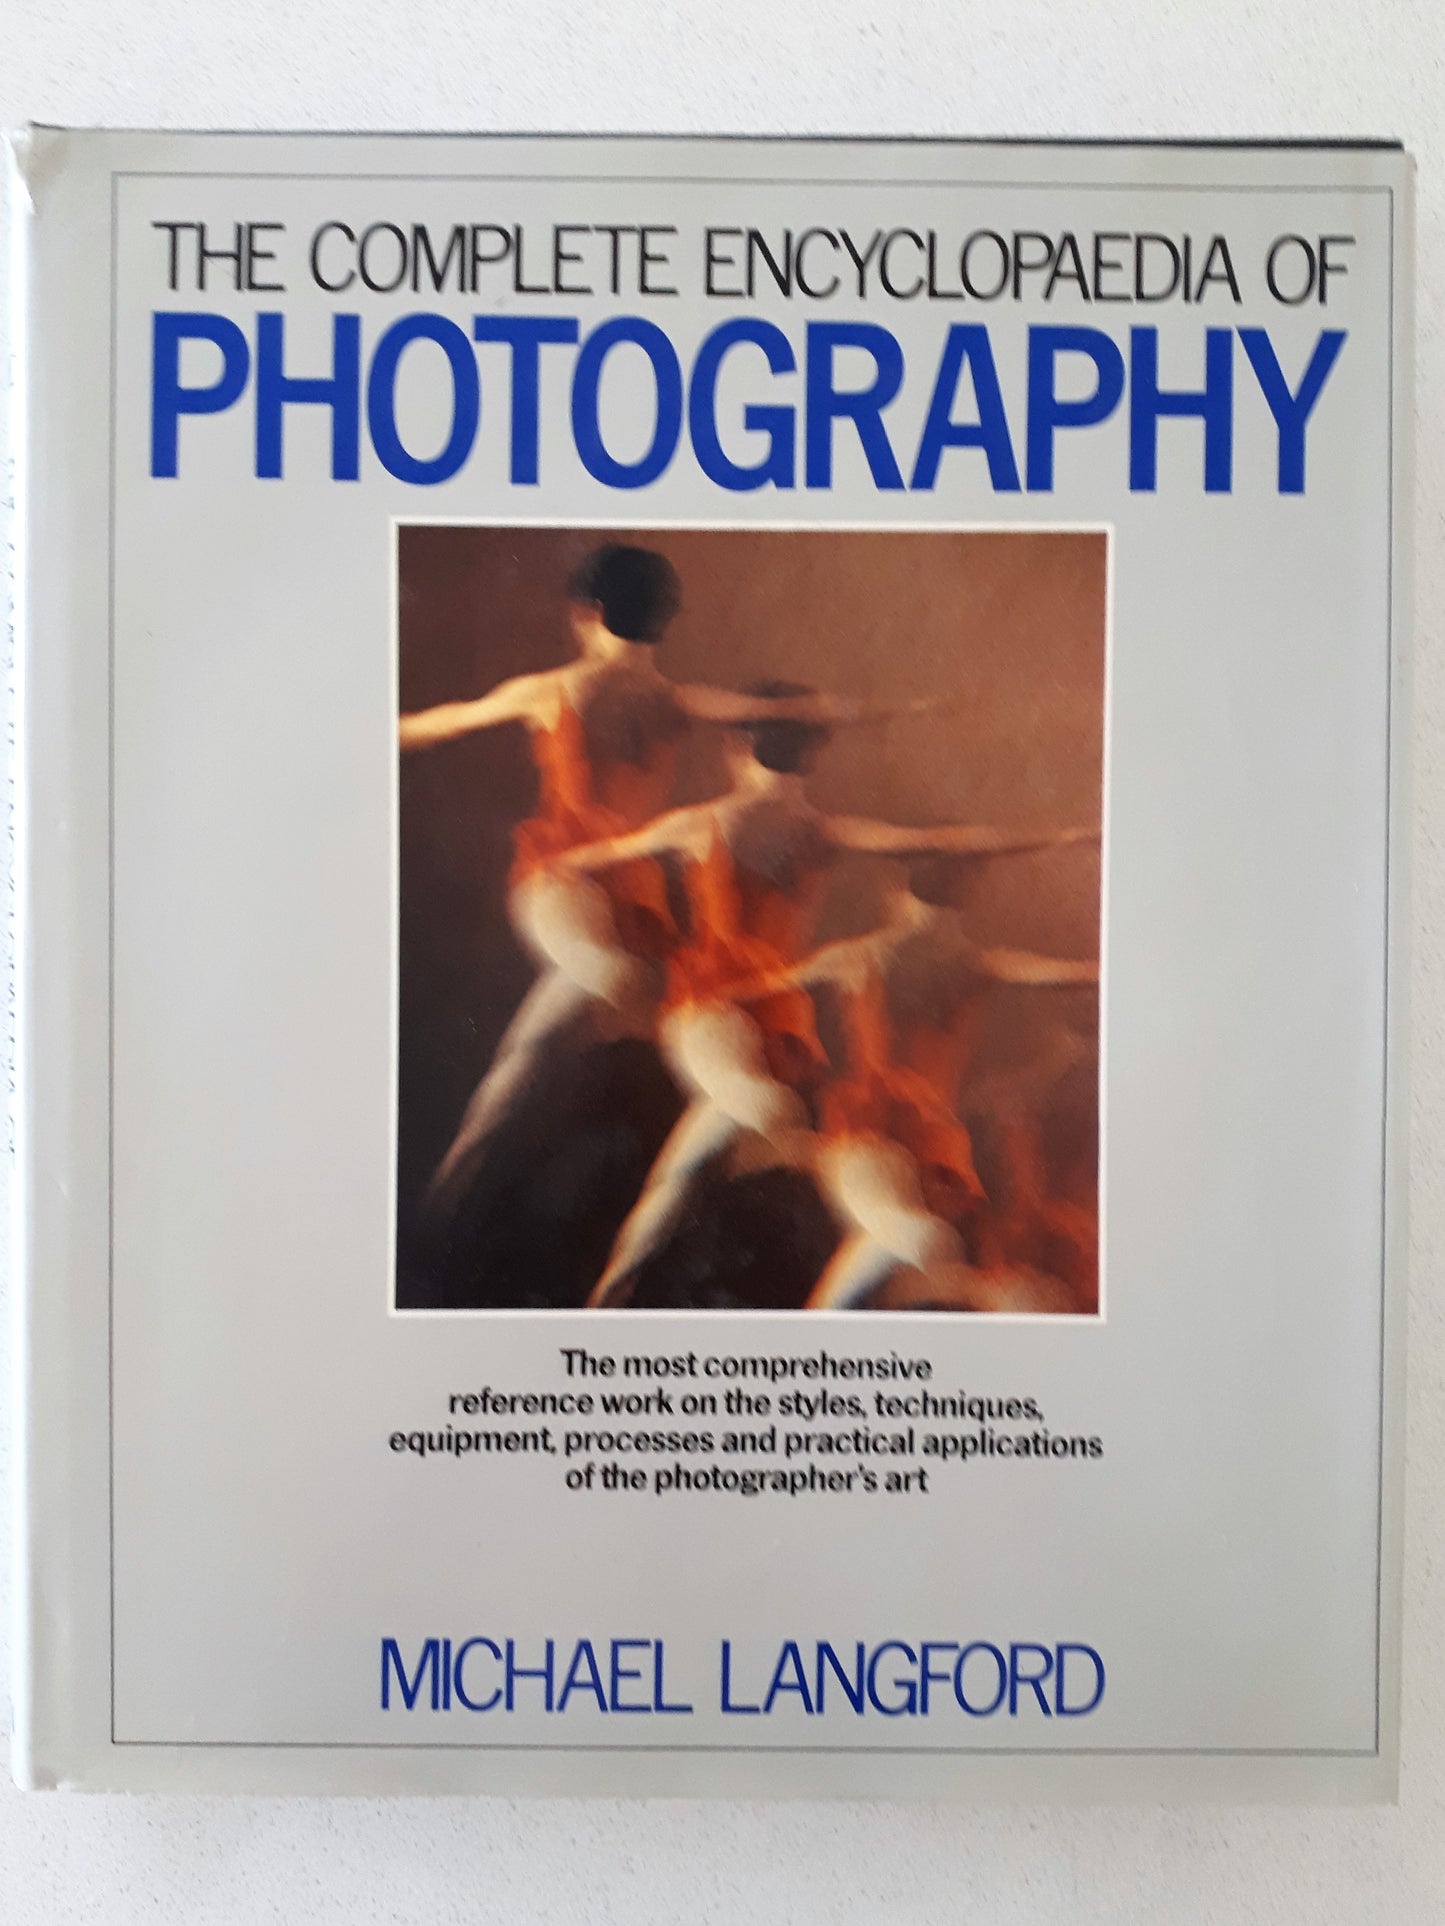 The Complete Encyclopaedia of Photography by Michael Langford